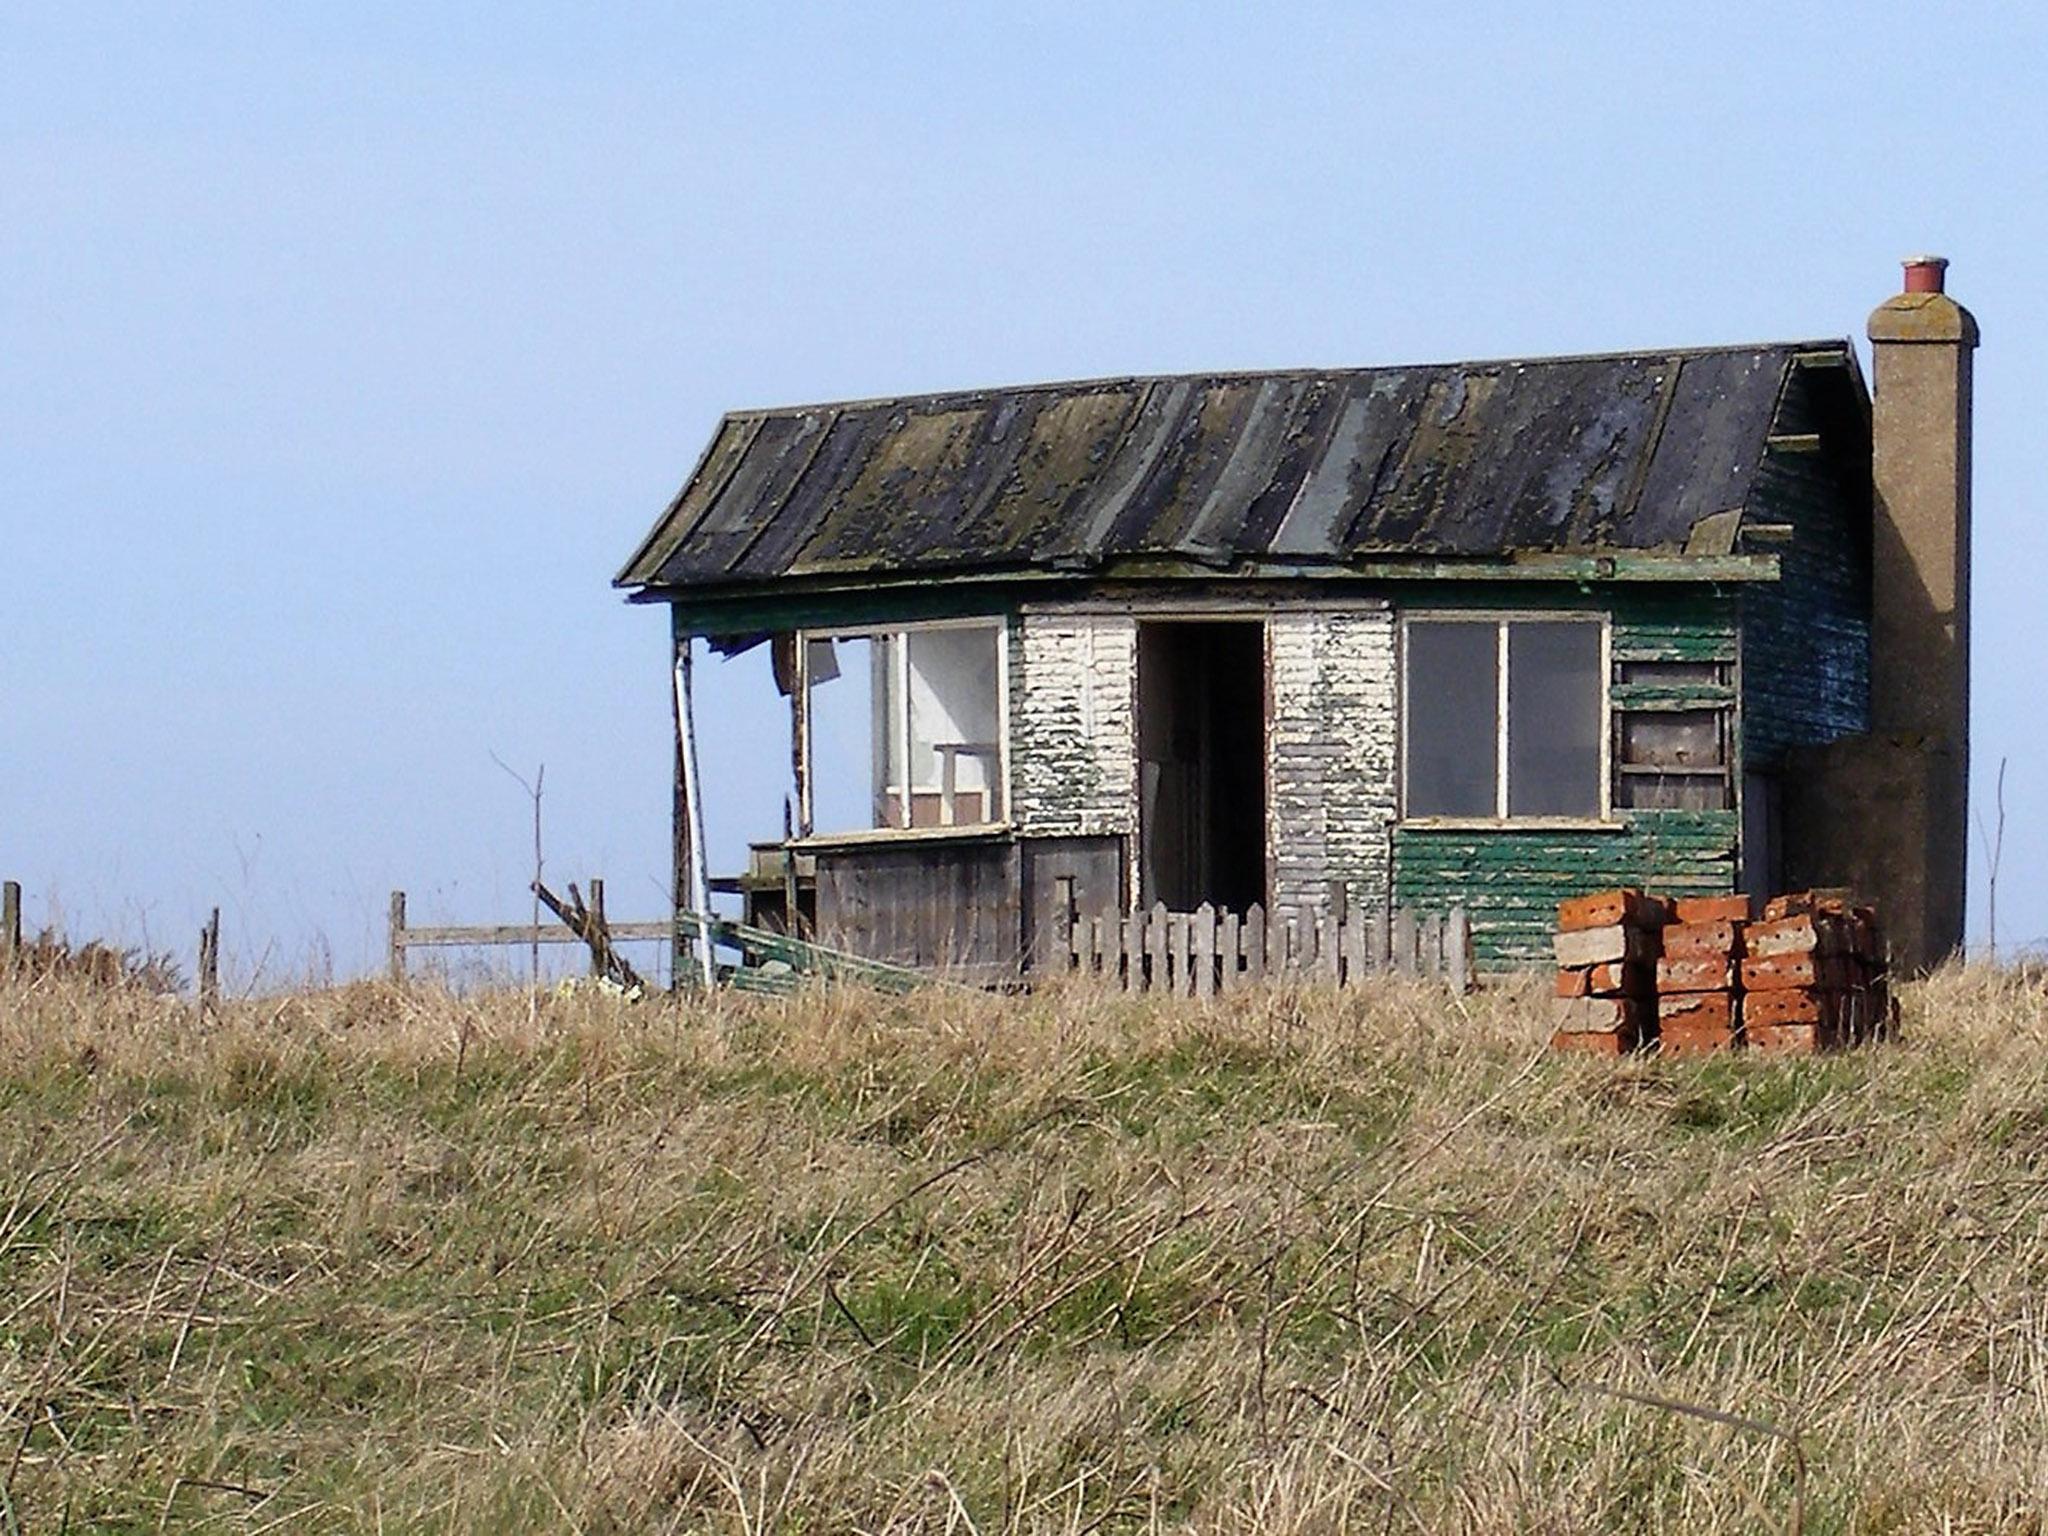 A surviving plotland dwelling on a Yorkshire cliff edge. Hardboard, discarded glass and second-hand bricks were among typical building materials